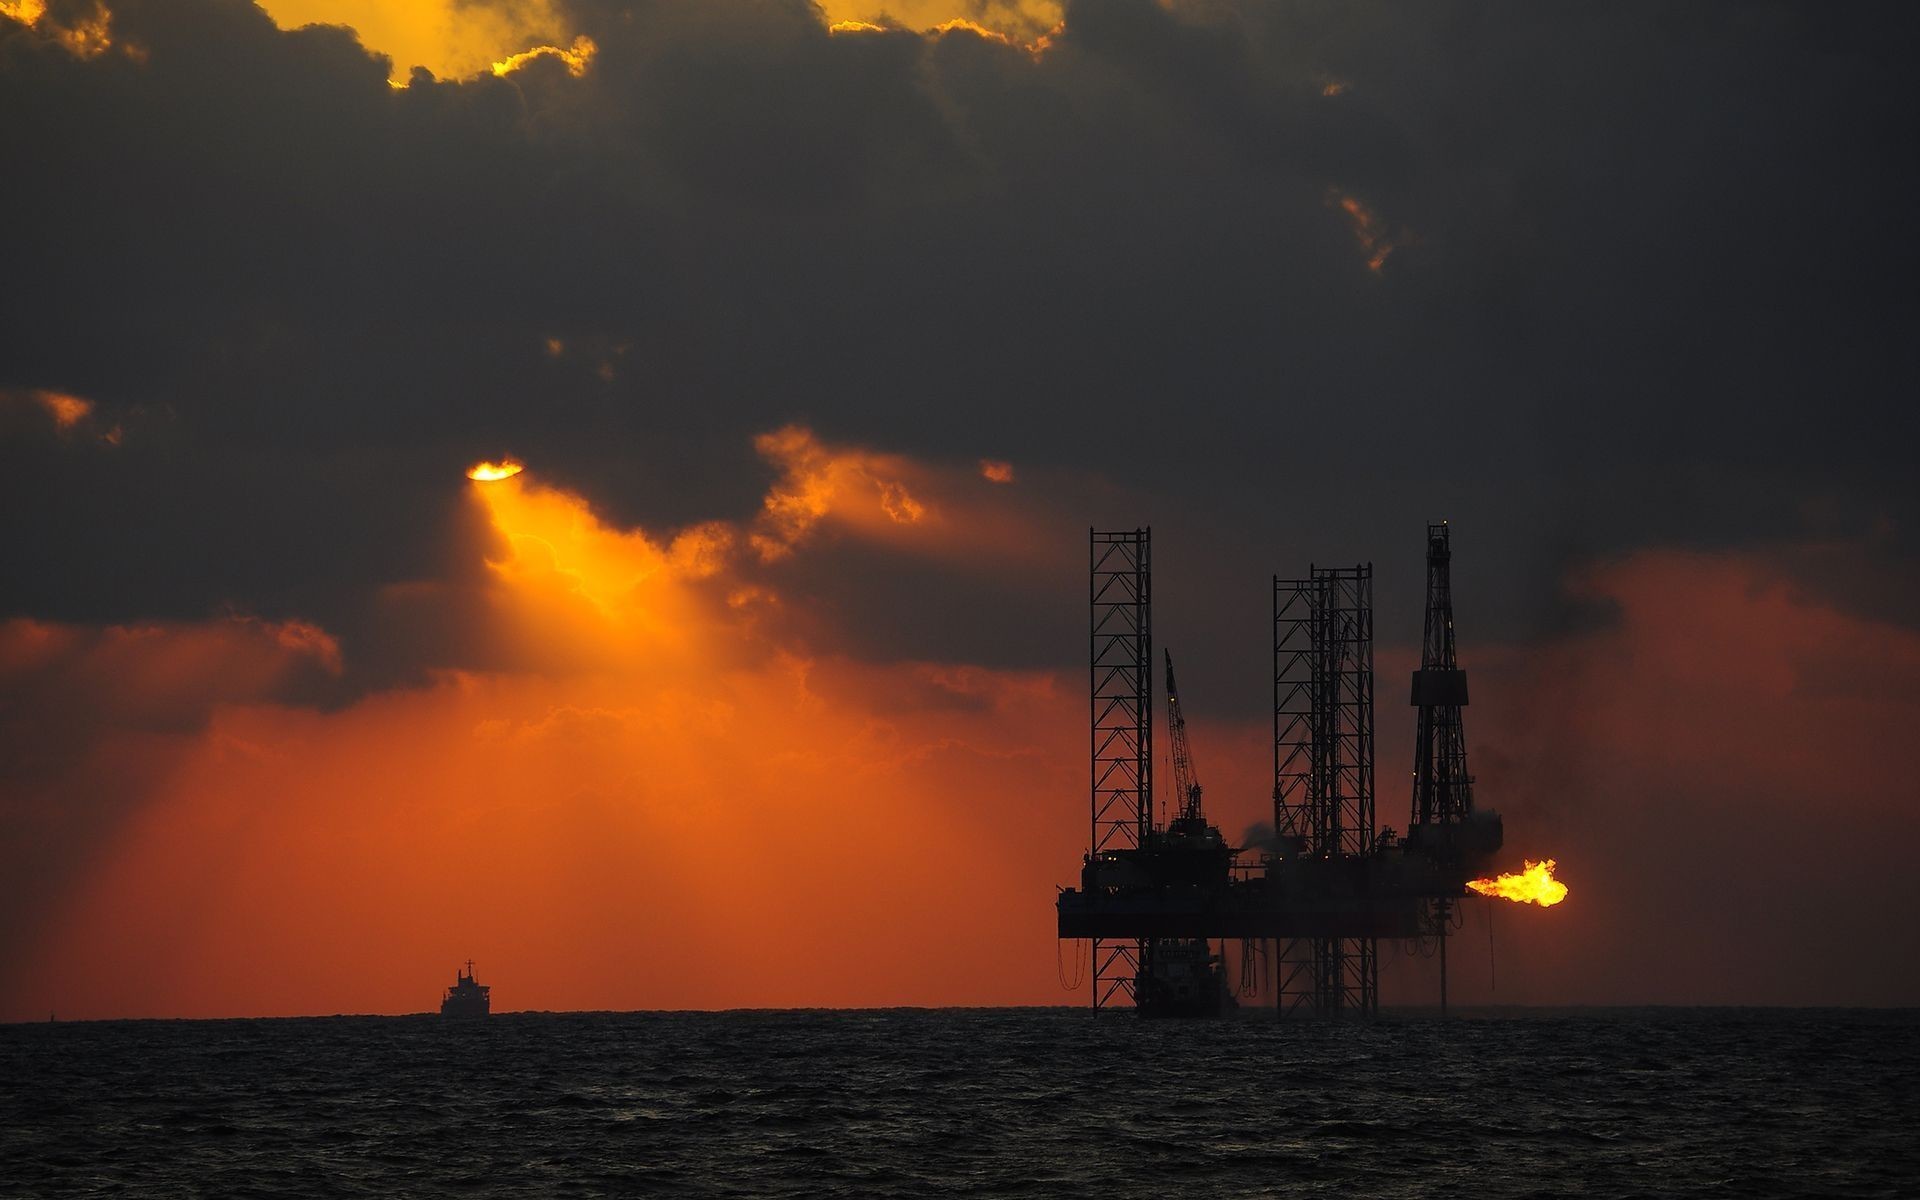 Oil Rig Wallpaper background picture